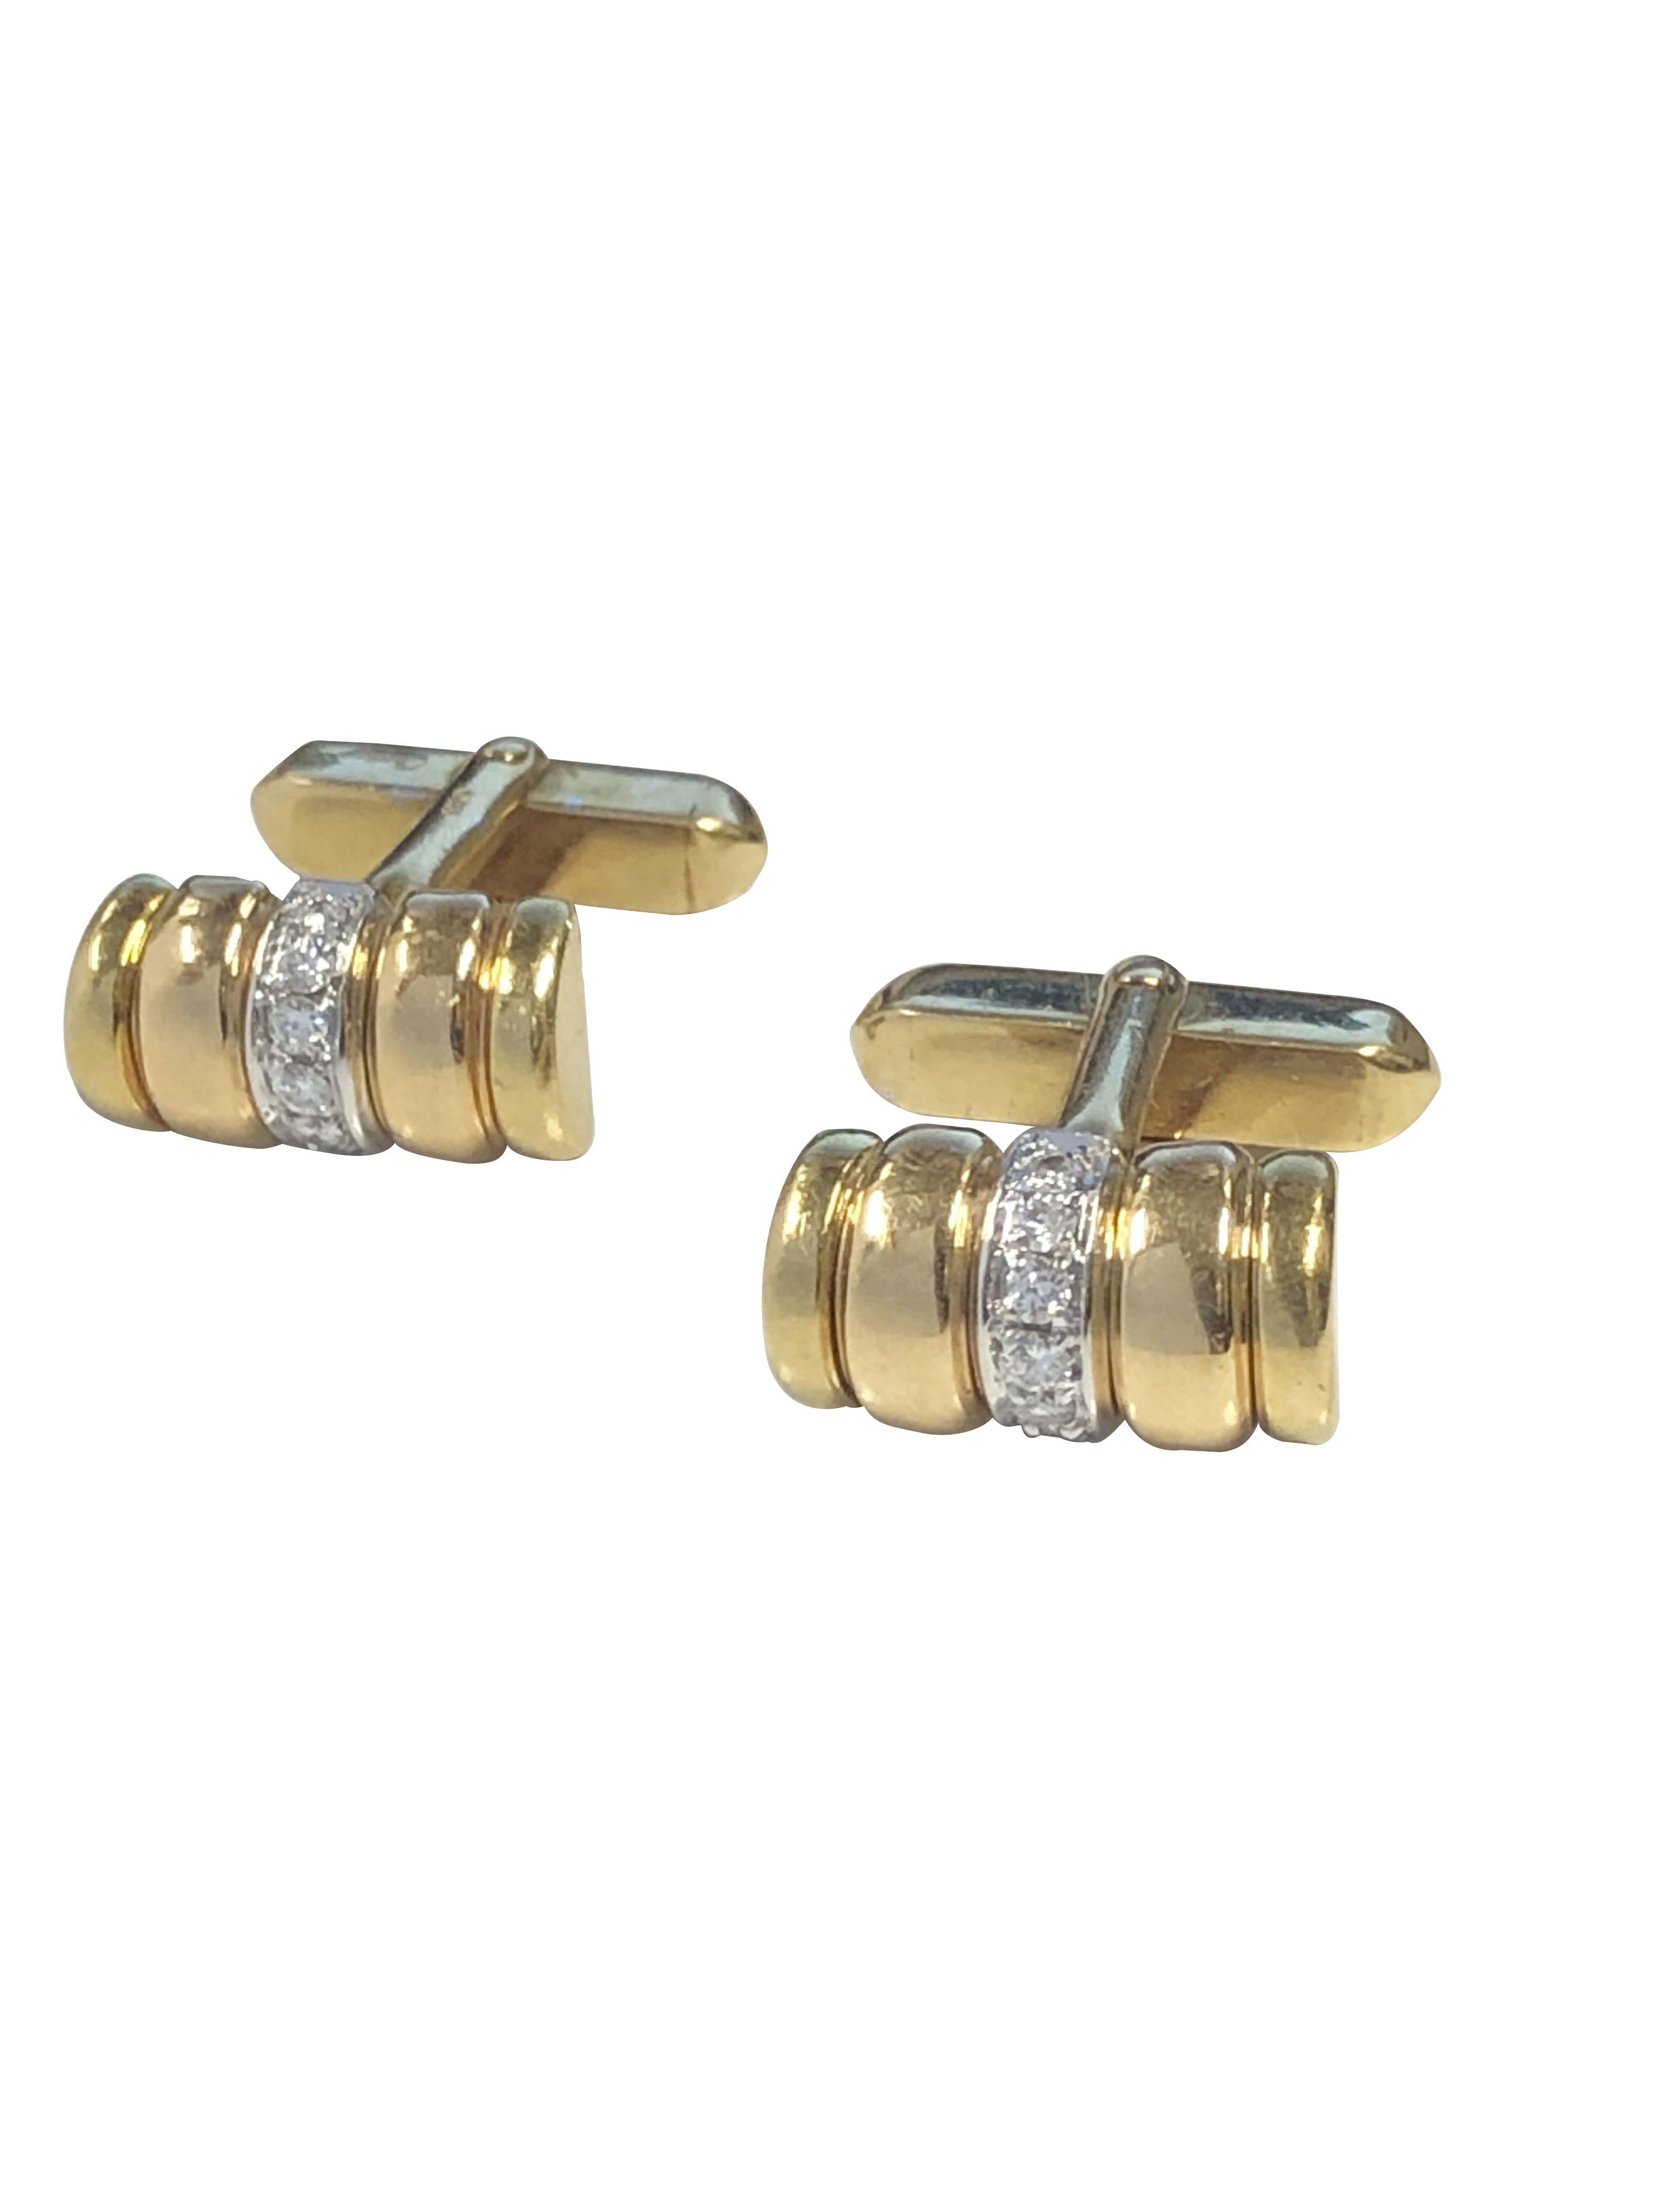 Cartier Yellow Gold and Diamond Cufflinks In Excellent Condition For Sale In Chicago, IL